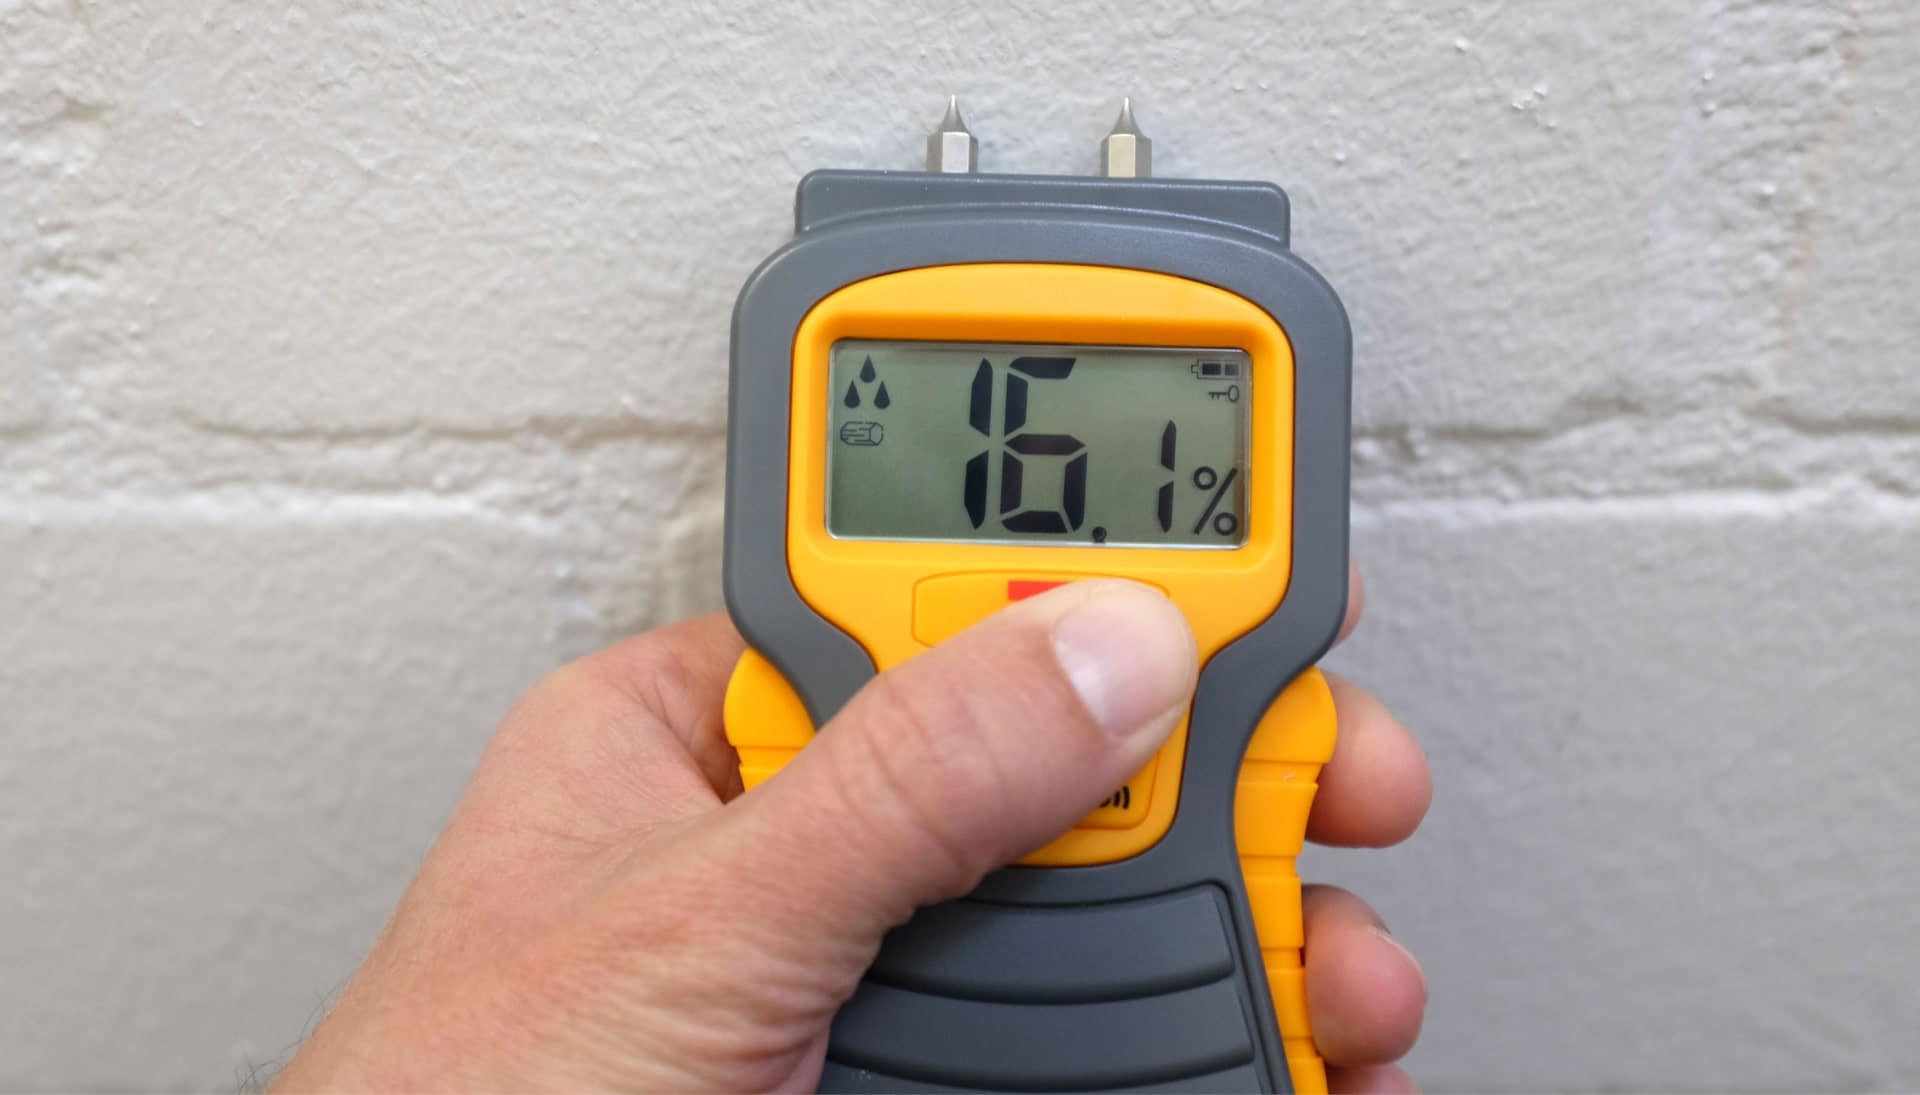 We provide fast, accurate, and affordable mold testing services in Peoria, Arizona.